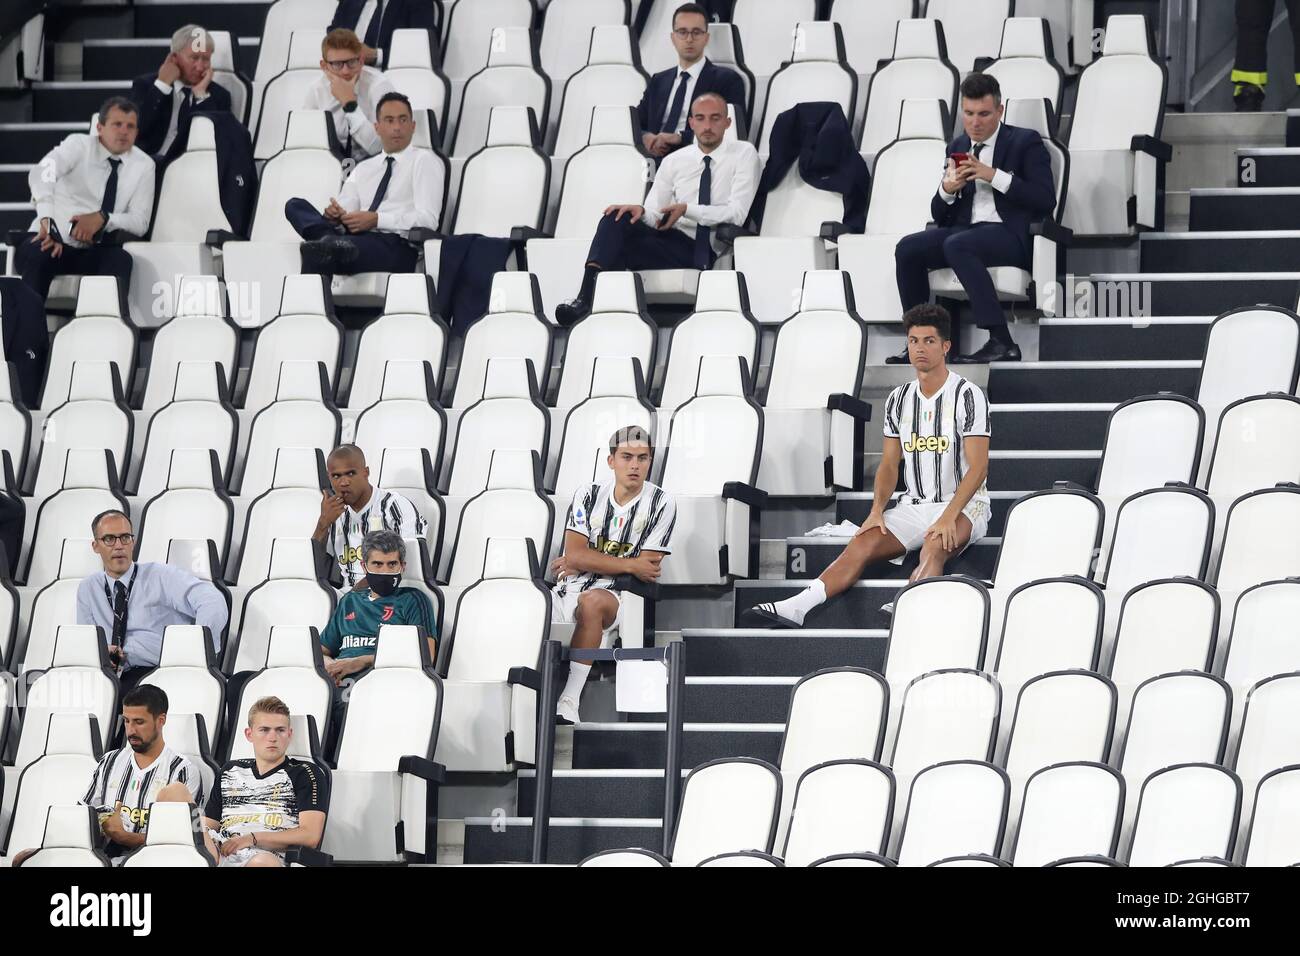 Cristiano Ronaldo of Juventus waits for the trophy presentation along with Paulo Dybala, Douglas Costa, Sami Khedira and Matthijs De Ligt during the Serie A match at Allianz Stadium, Turin. Picture date: 1st August 2020. Picture credit should read: Jonathan Moscrop/Sportimage via PA Images Stock Photo